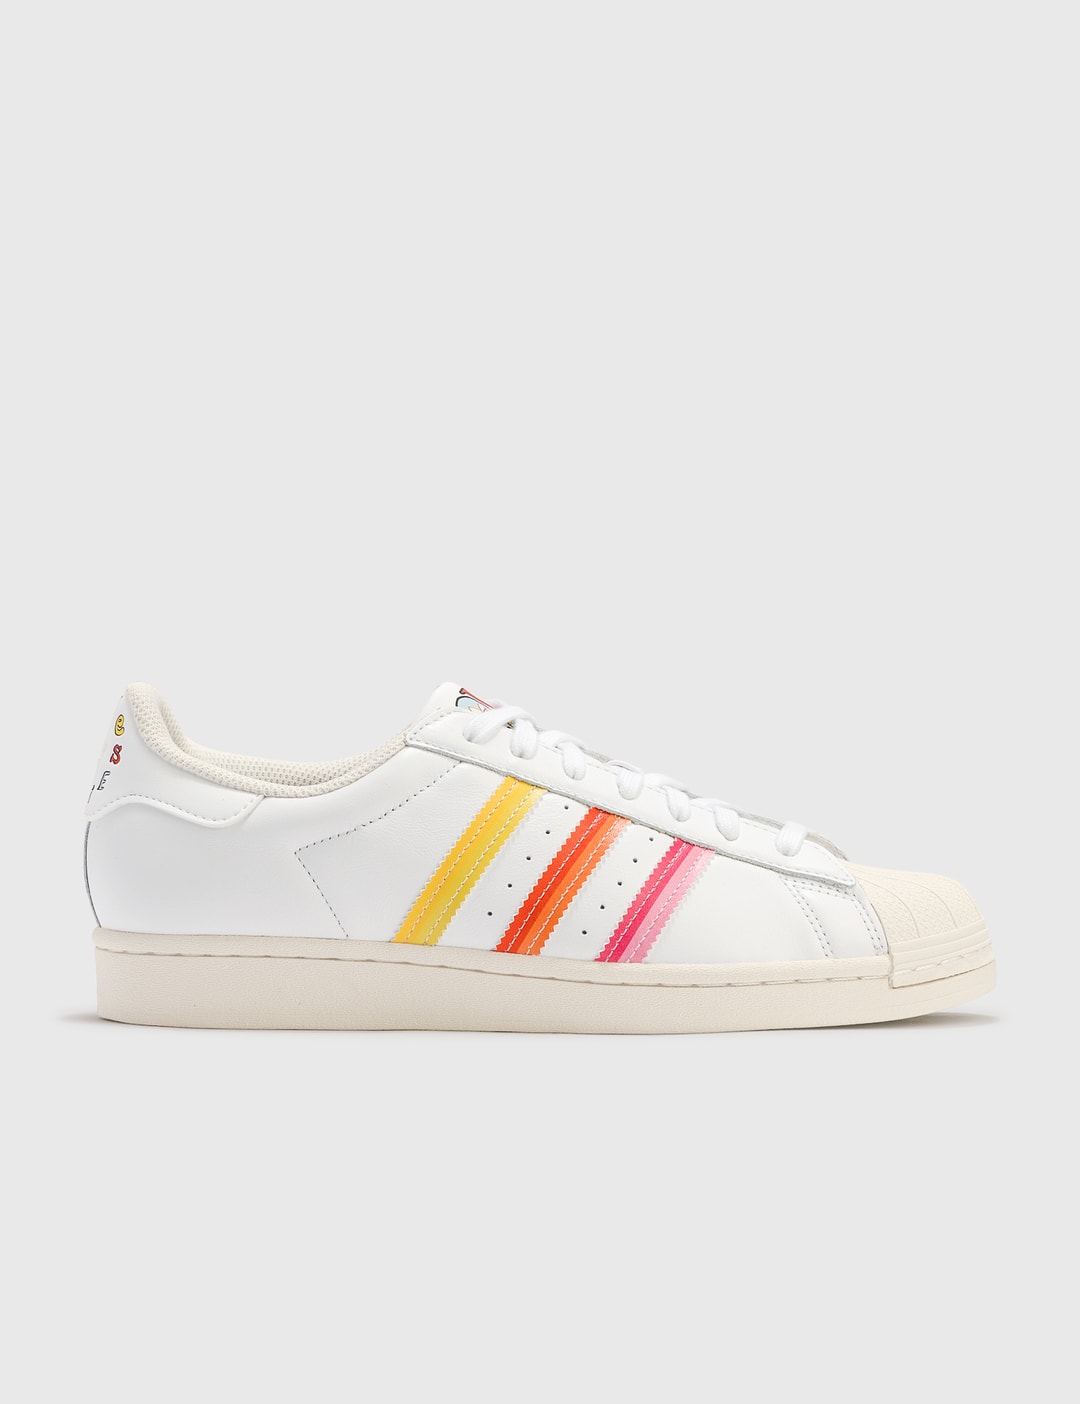 oosters Arrangement Uitschakelen Adidas Originals - Superstar Pride | HBX - Globally Curated Fashion and  Lifestyle by Hypebeast